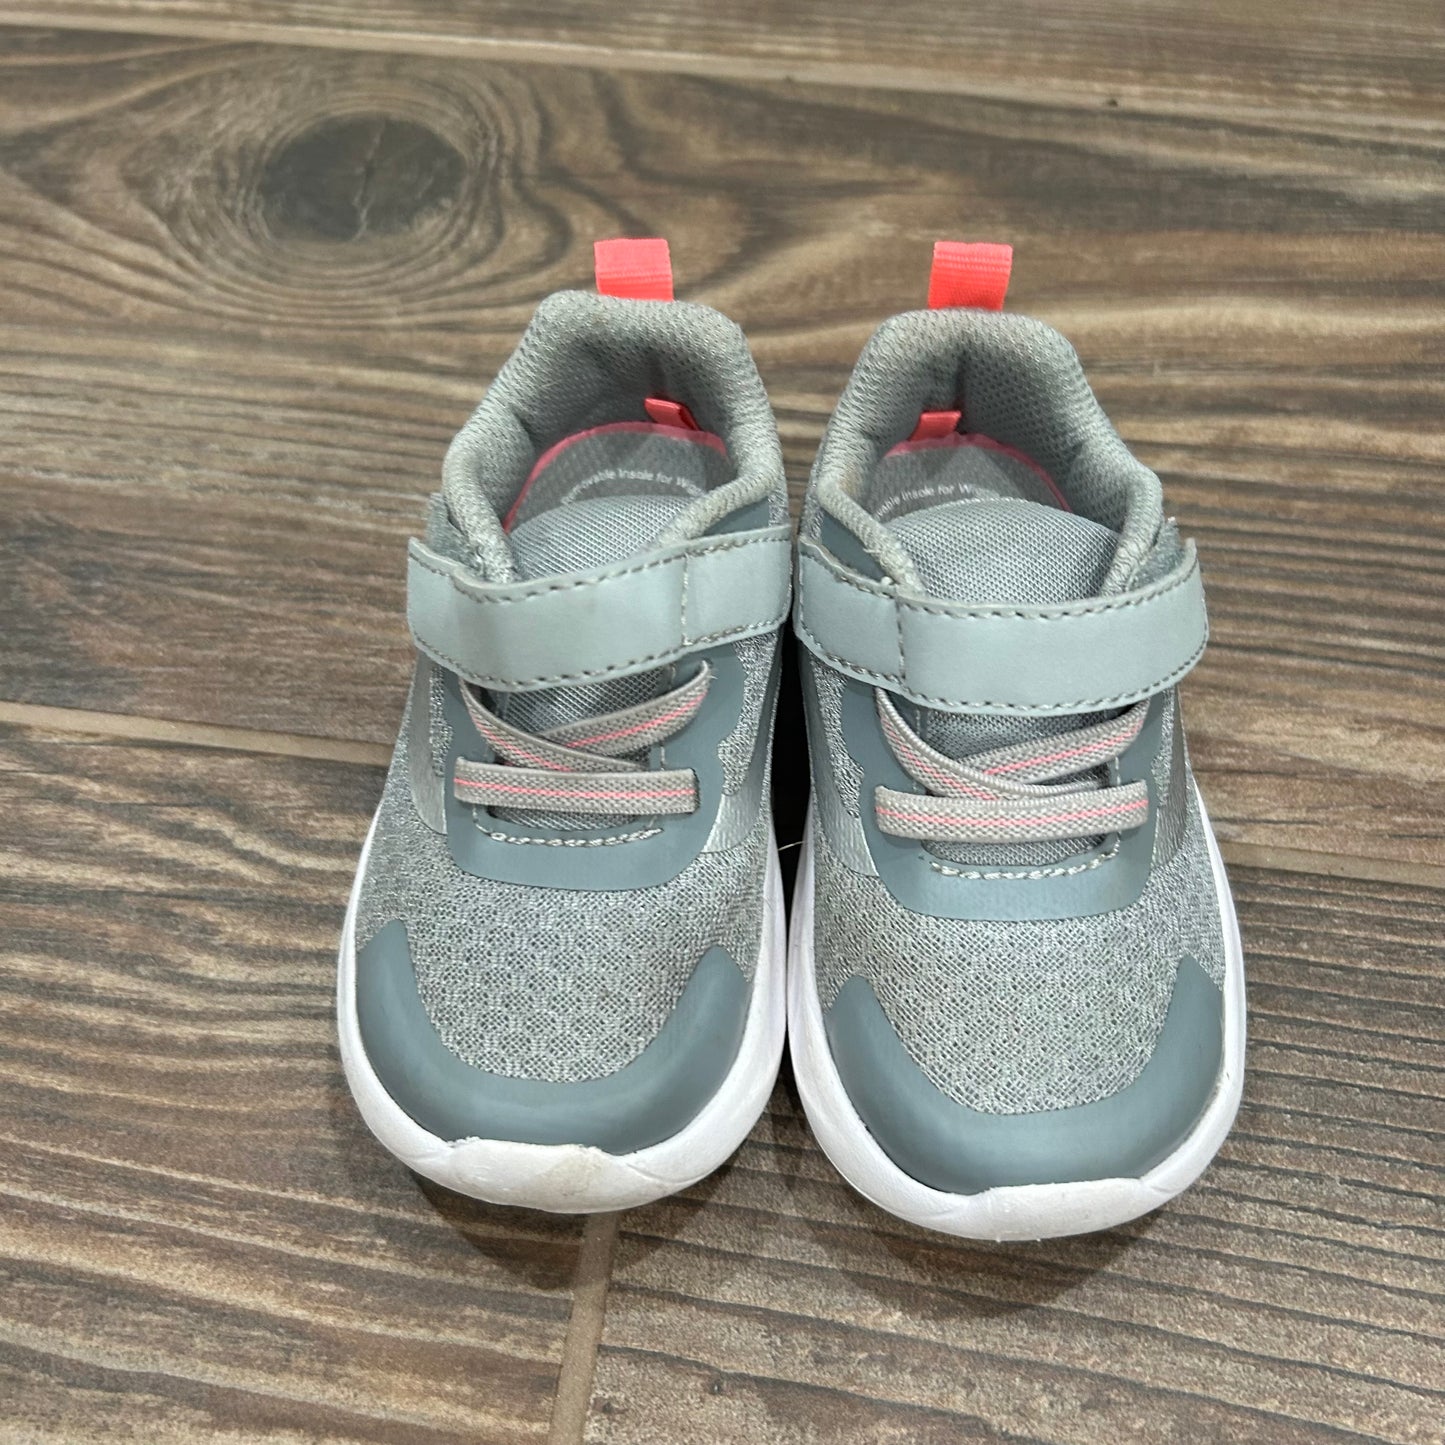 Size 5 (Toddler) Athletic Works Grey Shoes - Good Used Condition